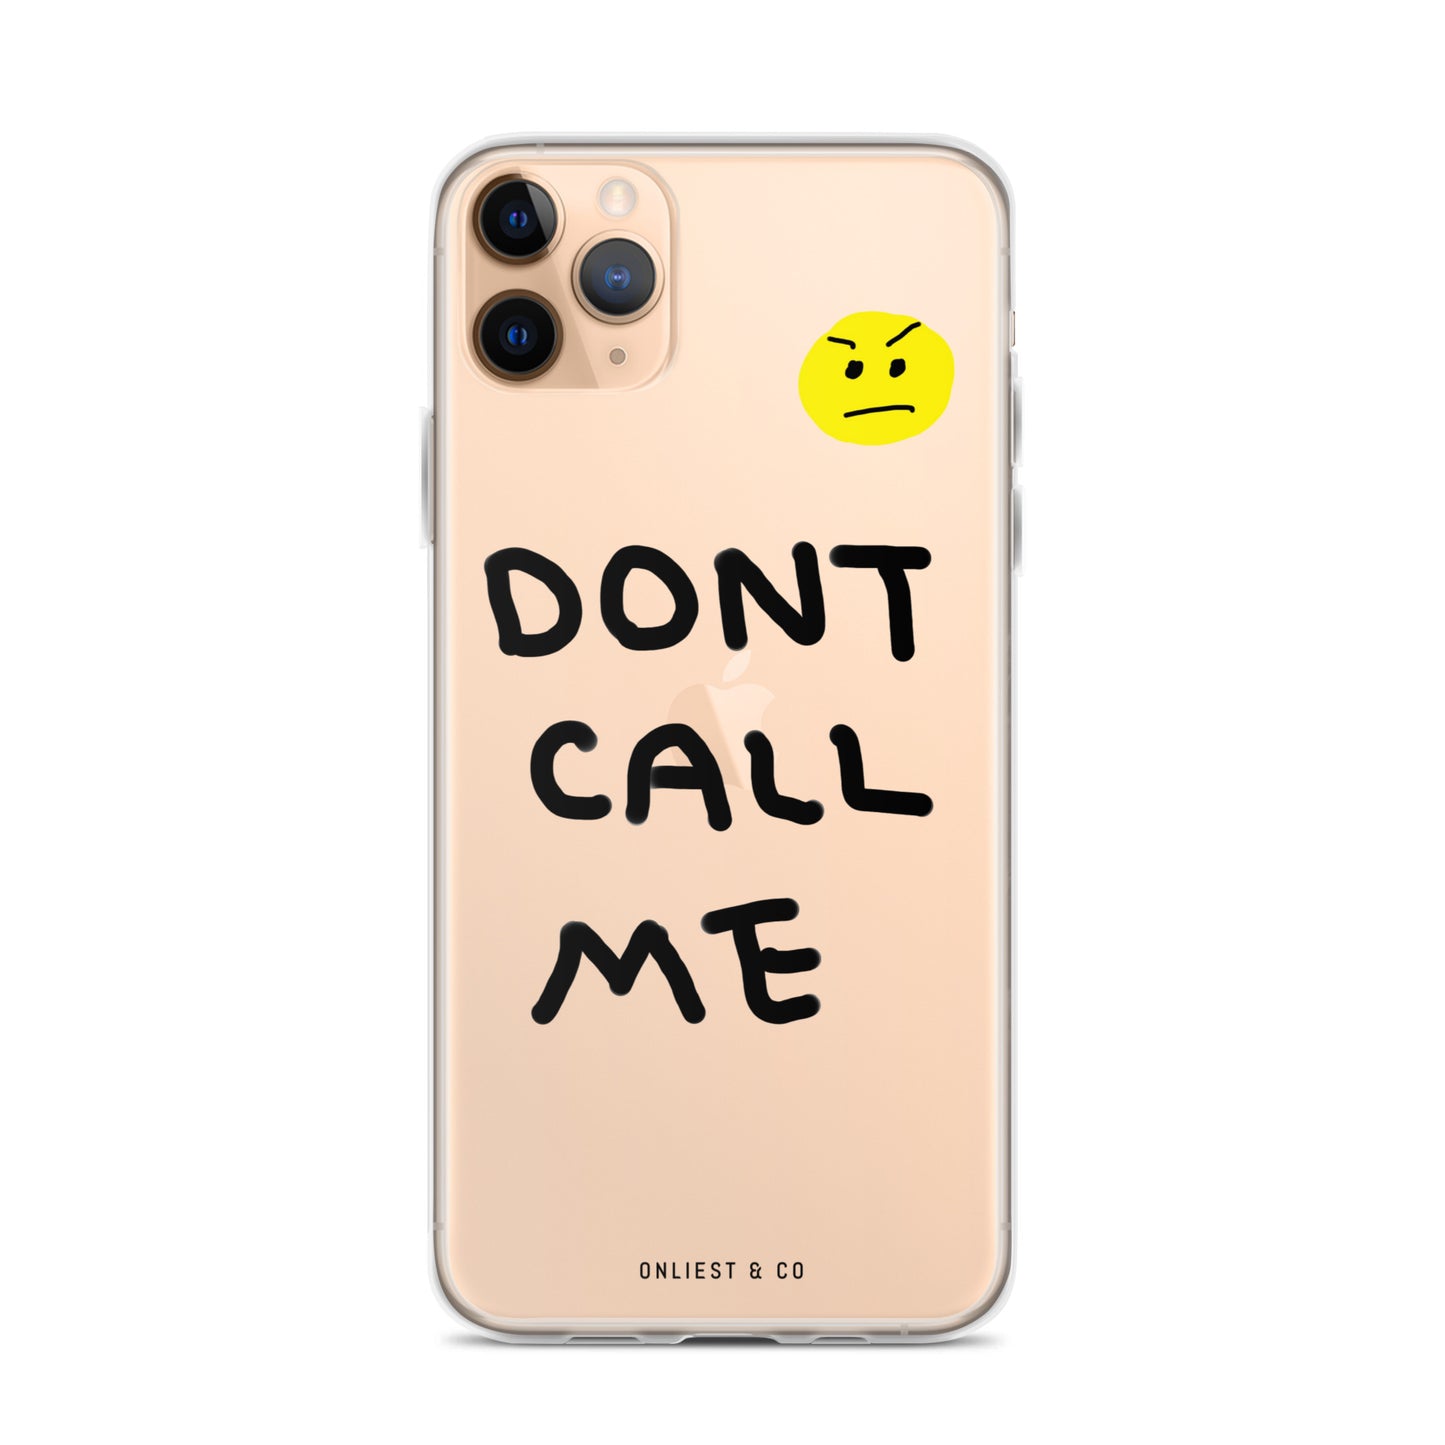 Dont CALL ME Case